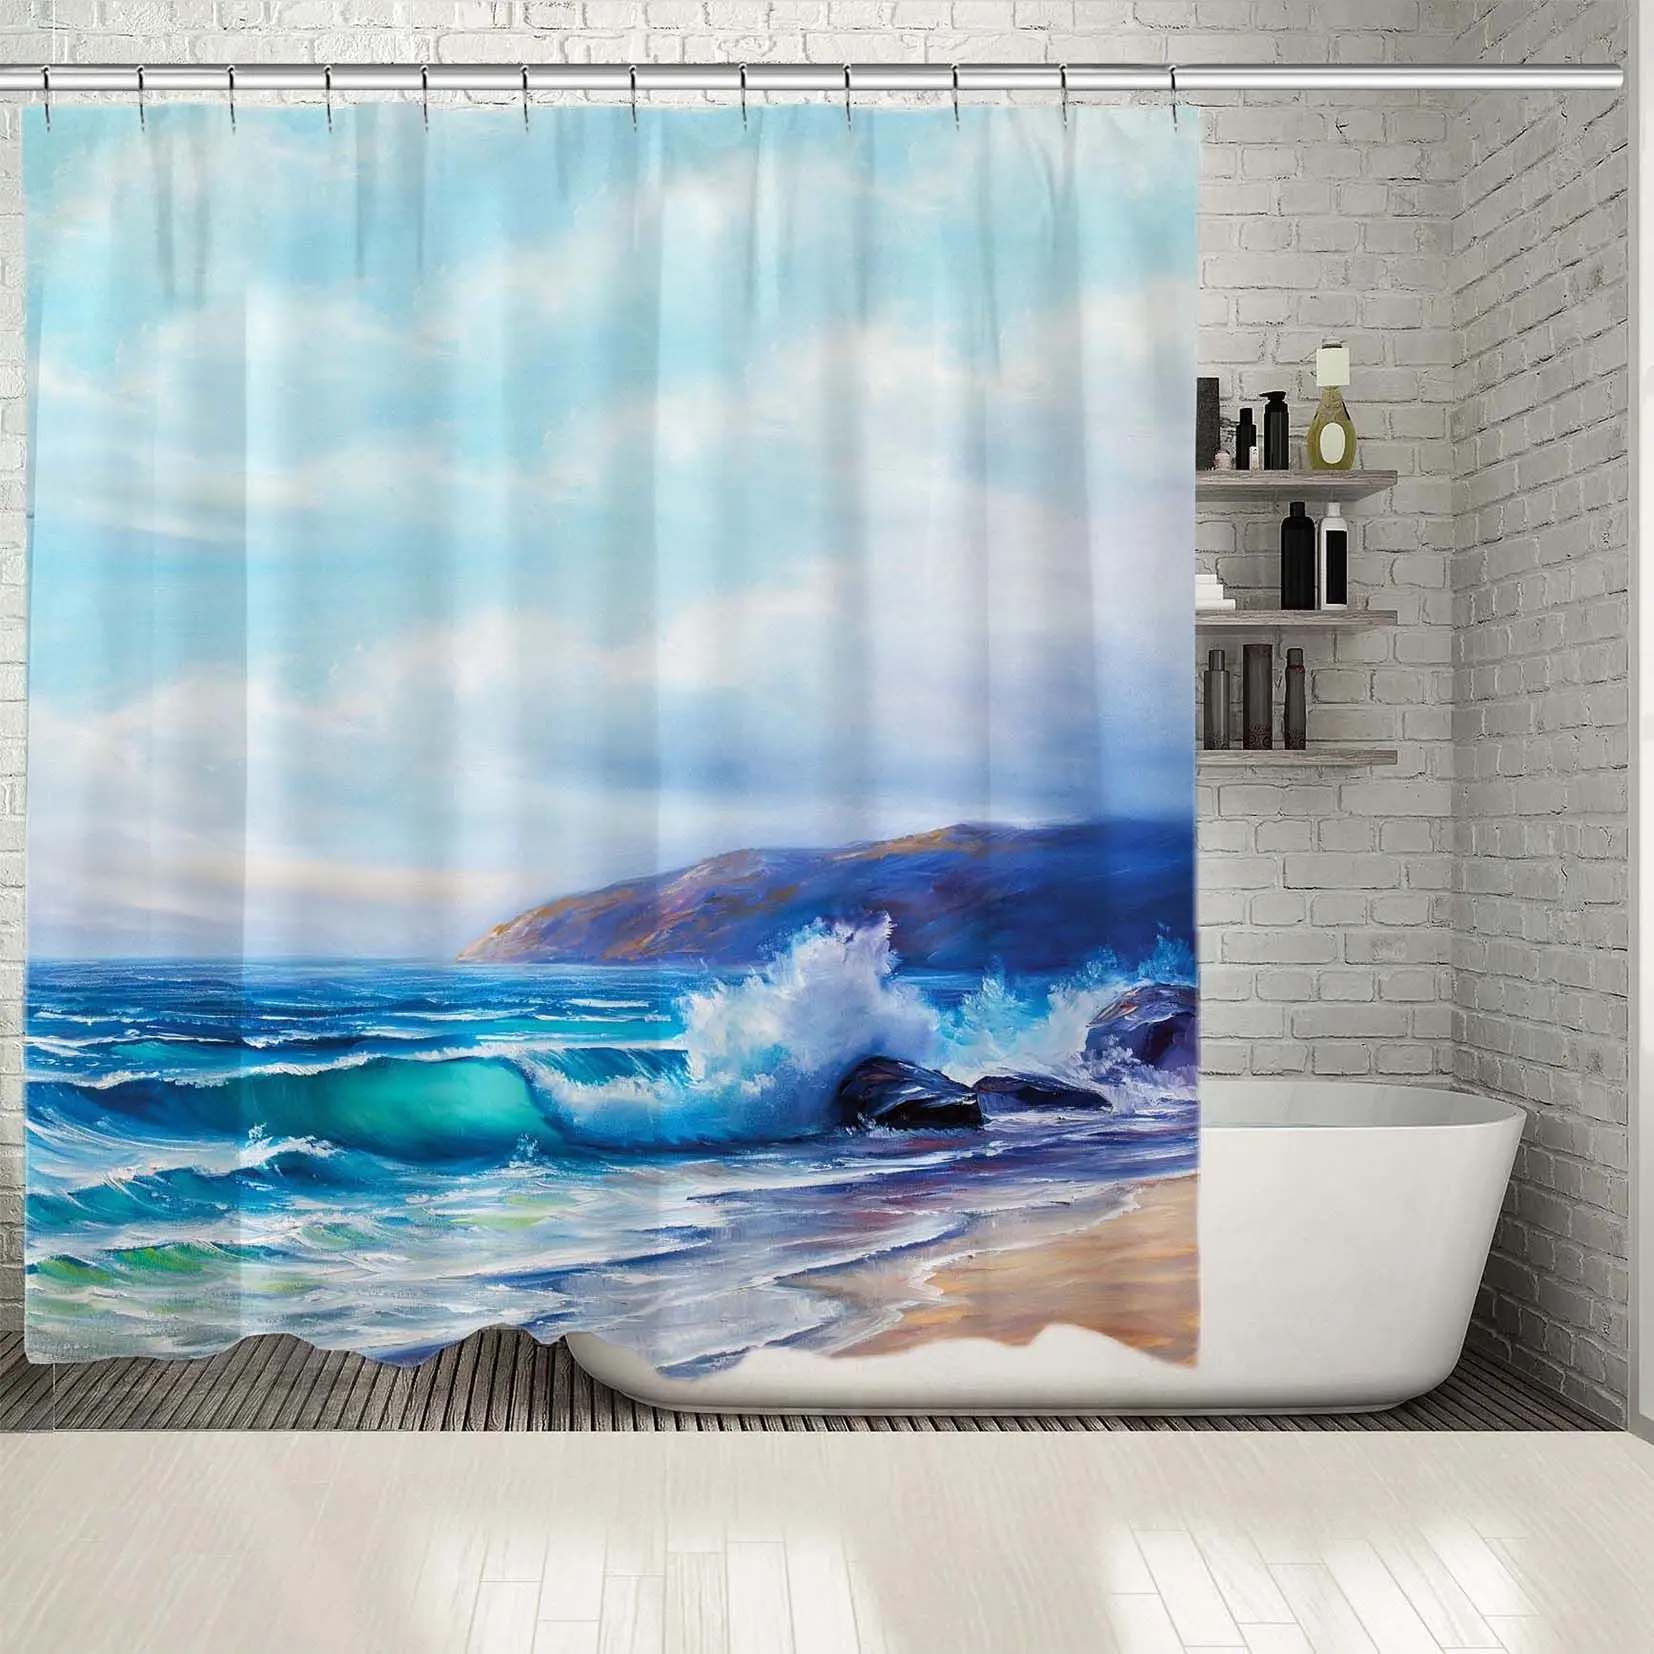 

Shower Curtain Tropical Beach Wavy Sea Exotic Nature Seaside Decorating Oil Painting Style Illustration Blue Beige